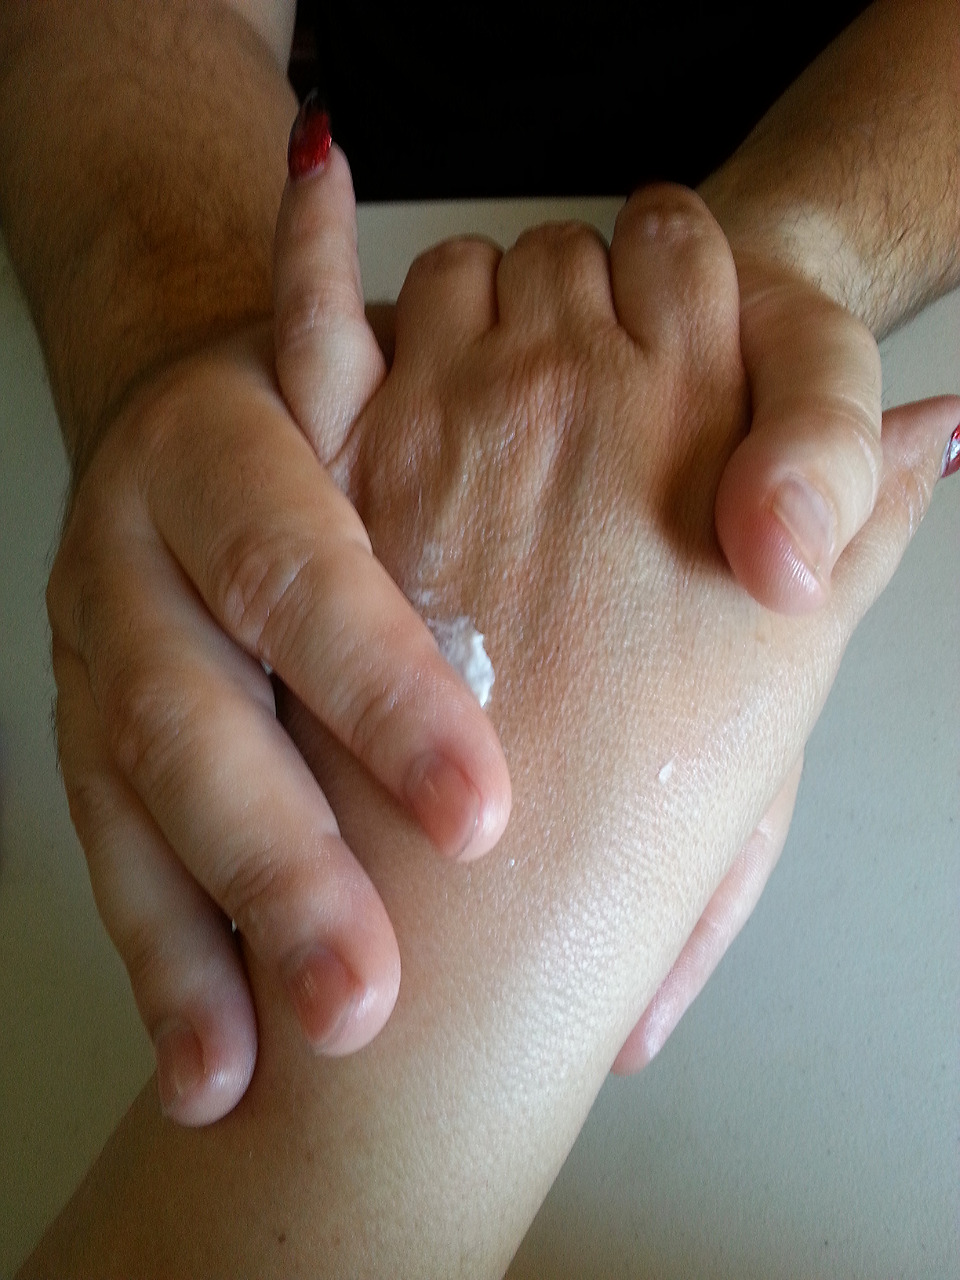 pixie-bitch75:  Getting an amazing hand massage from Daddy, gives me tingly goosebumps…